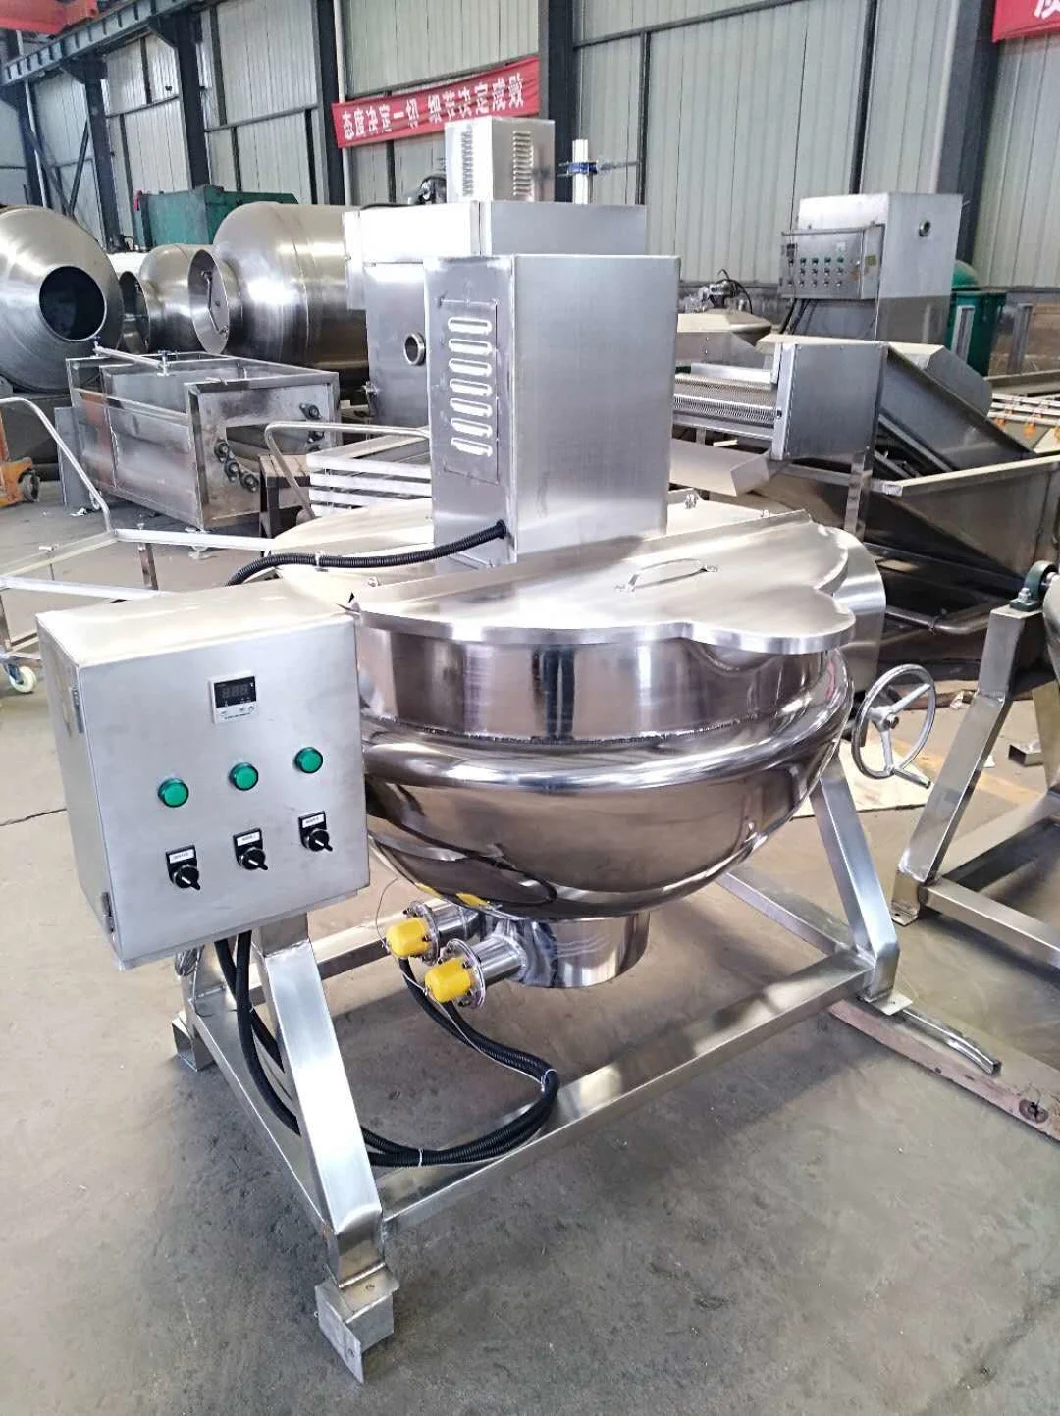 Factory Price Automatic Steam/Gas/Electric Jacketed Heating Mixing Kettle/Industrial 50-600L Cooking Pot